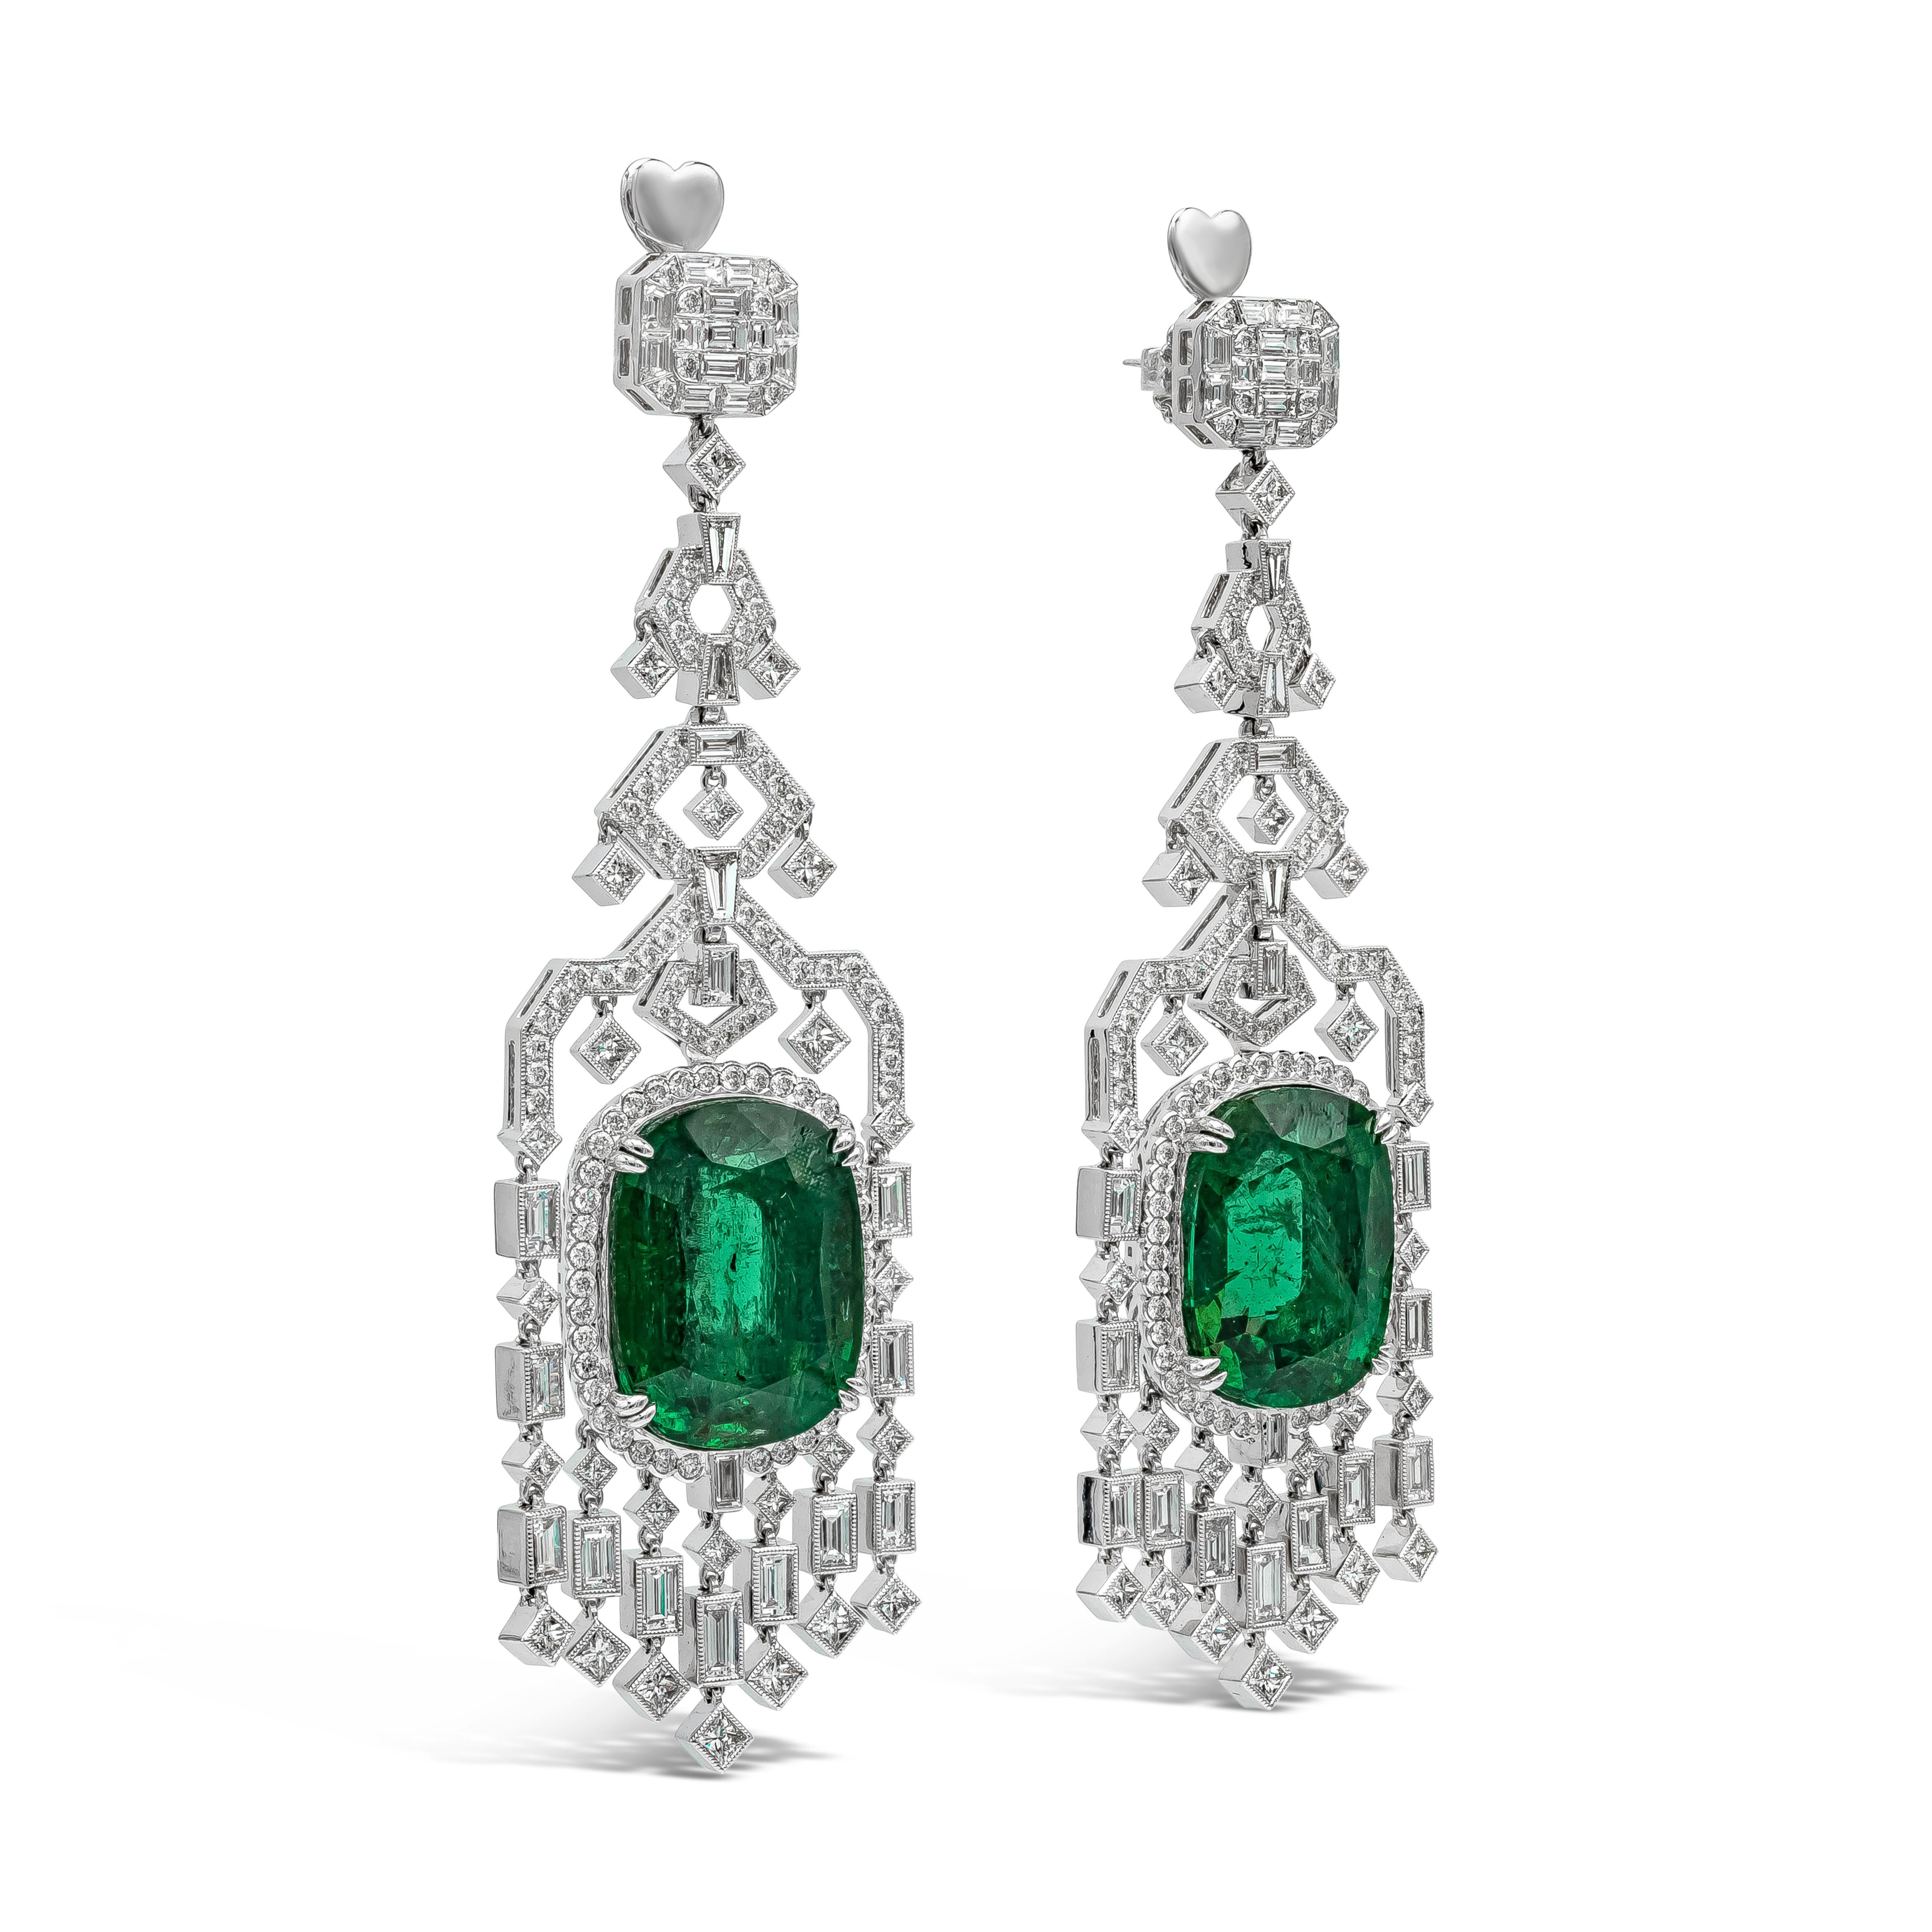 An elegant and rare pair of high end earrings showcasing two large green emeralds weighing 45.76 carats total, set in an intricately-designed chandelier design accented with mixed cut  brilliant diamonds. Diamonds weigh 9.25 carats total. Made in